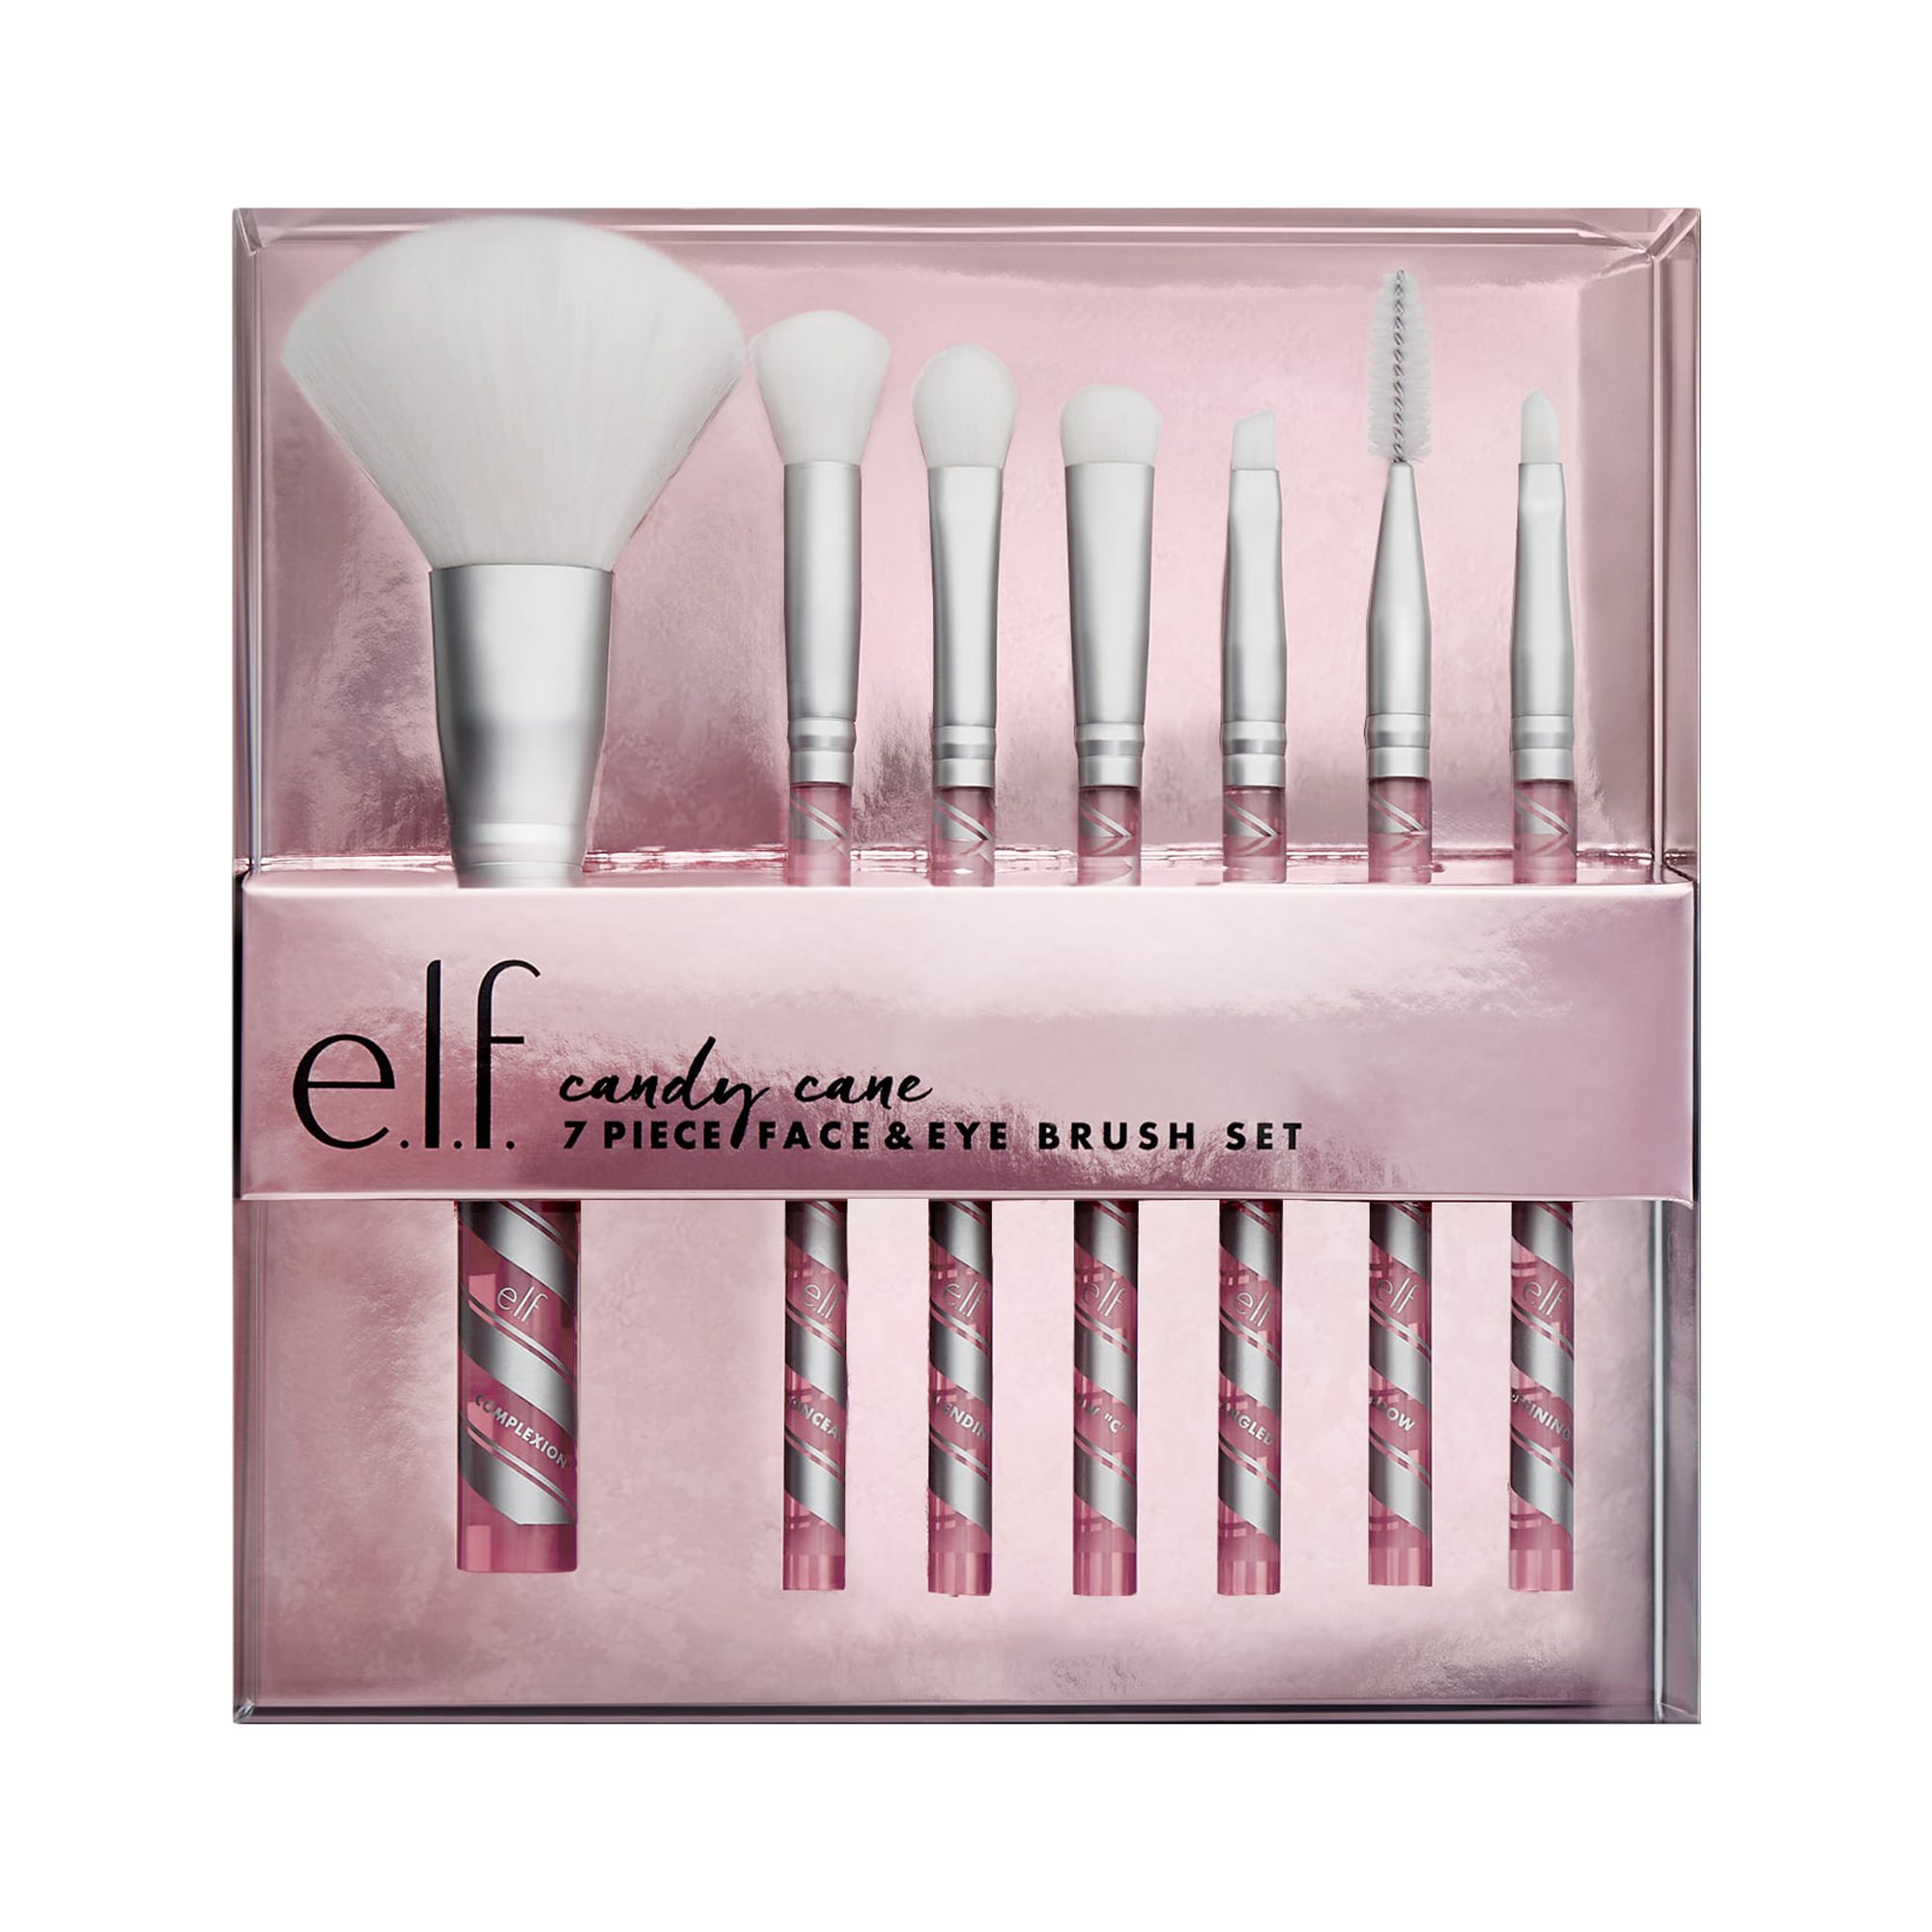 ($23 Value) e.l.f. Candy Cane 7 Piece Holiday Makeup Brush Set, Face & Eye - image 1 of 9